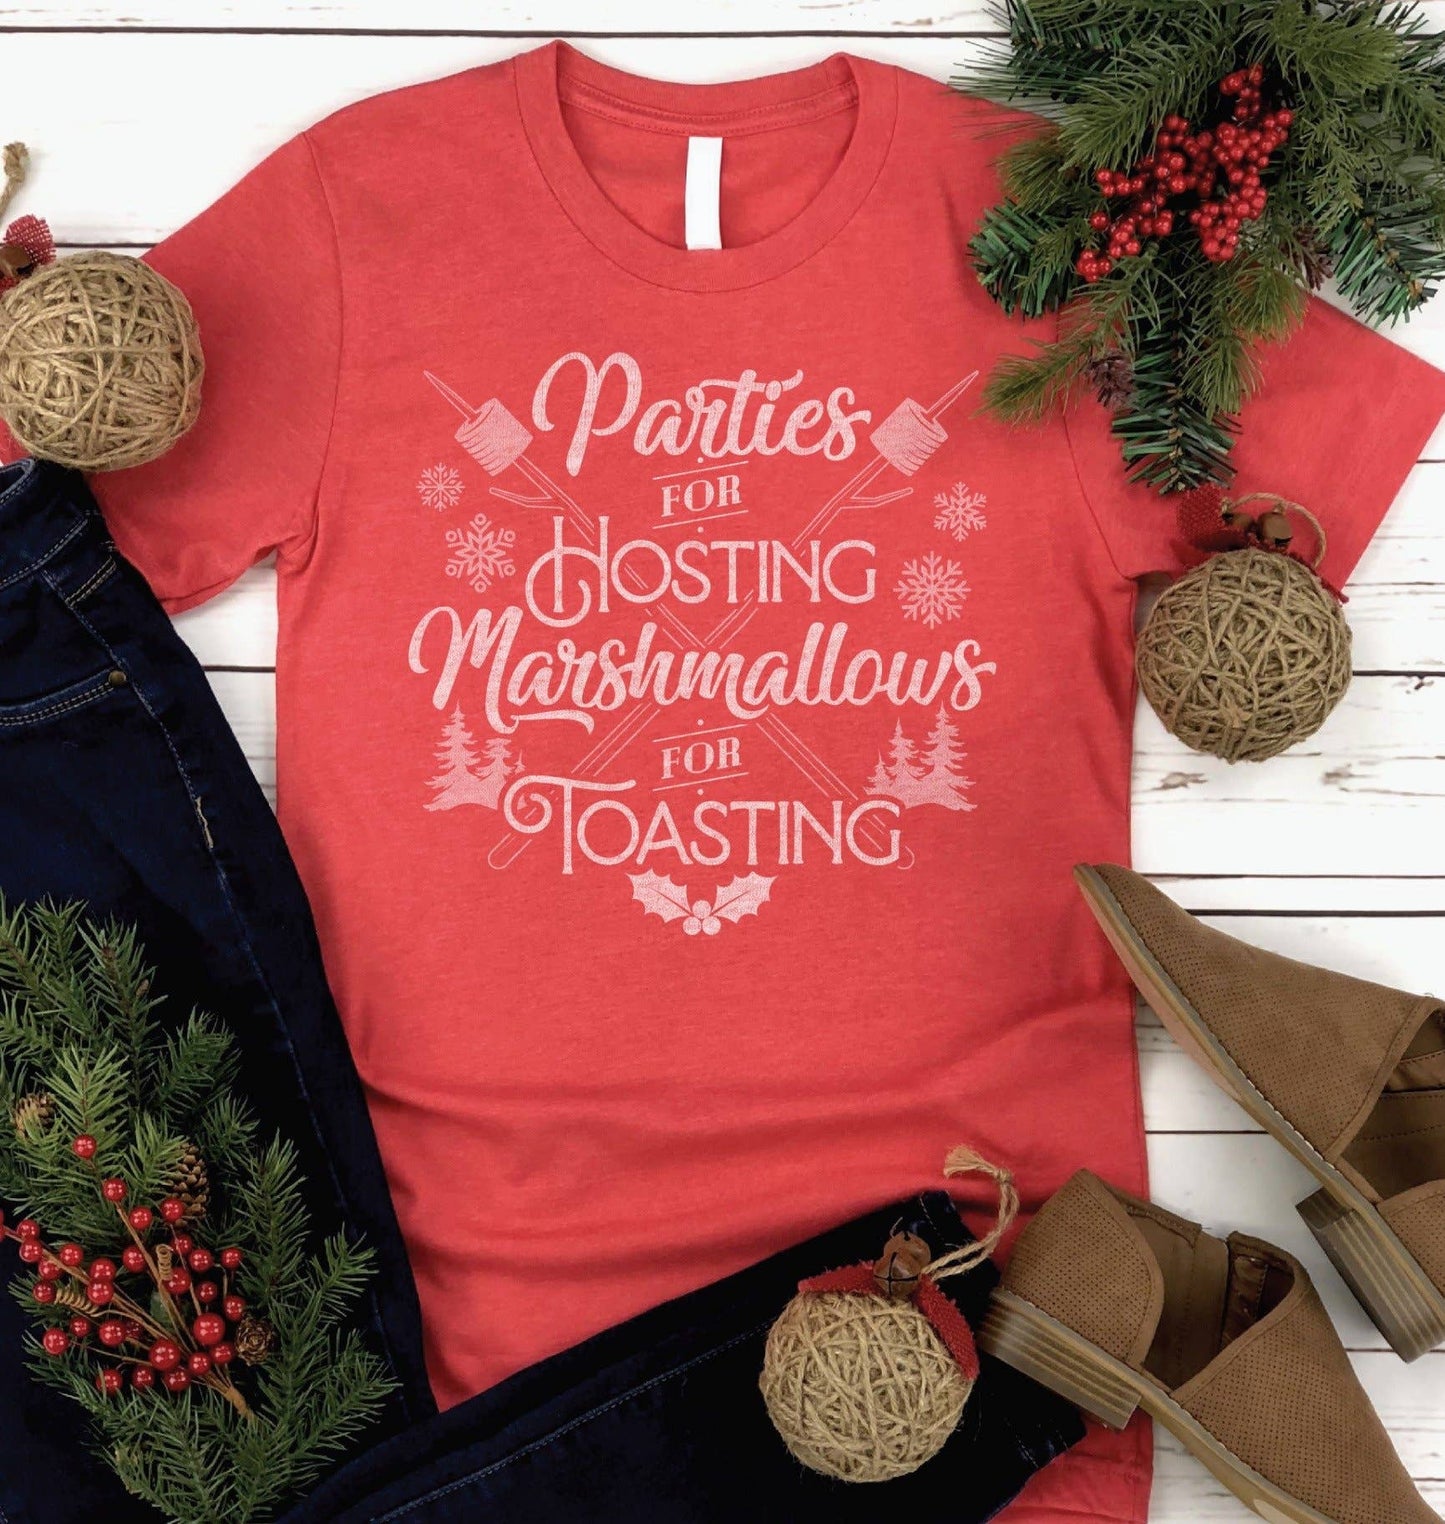 Parties for Hosting Marshmallows for Toasting T-Shirt